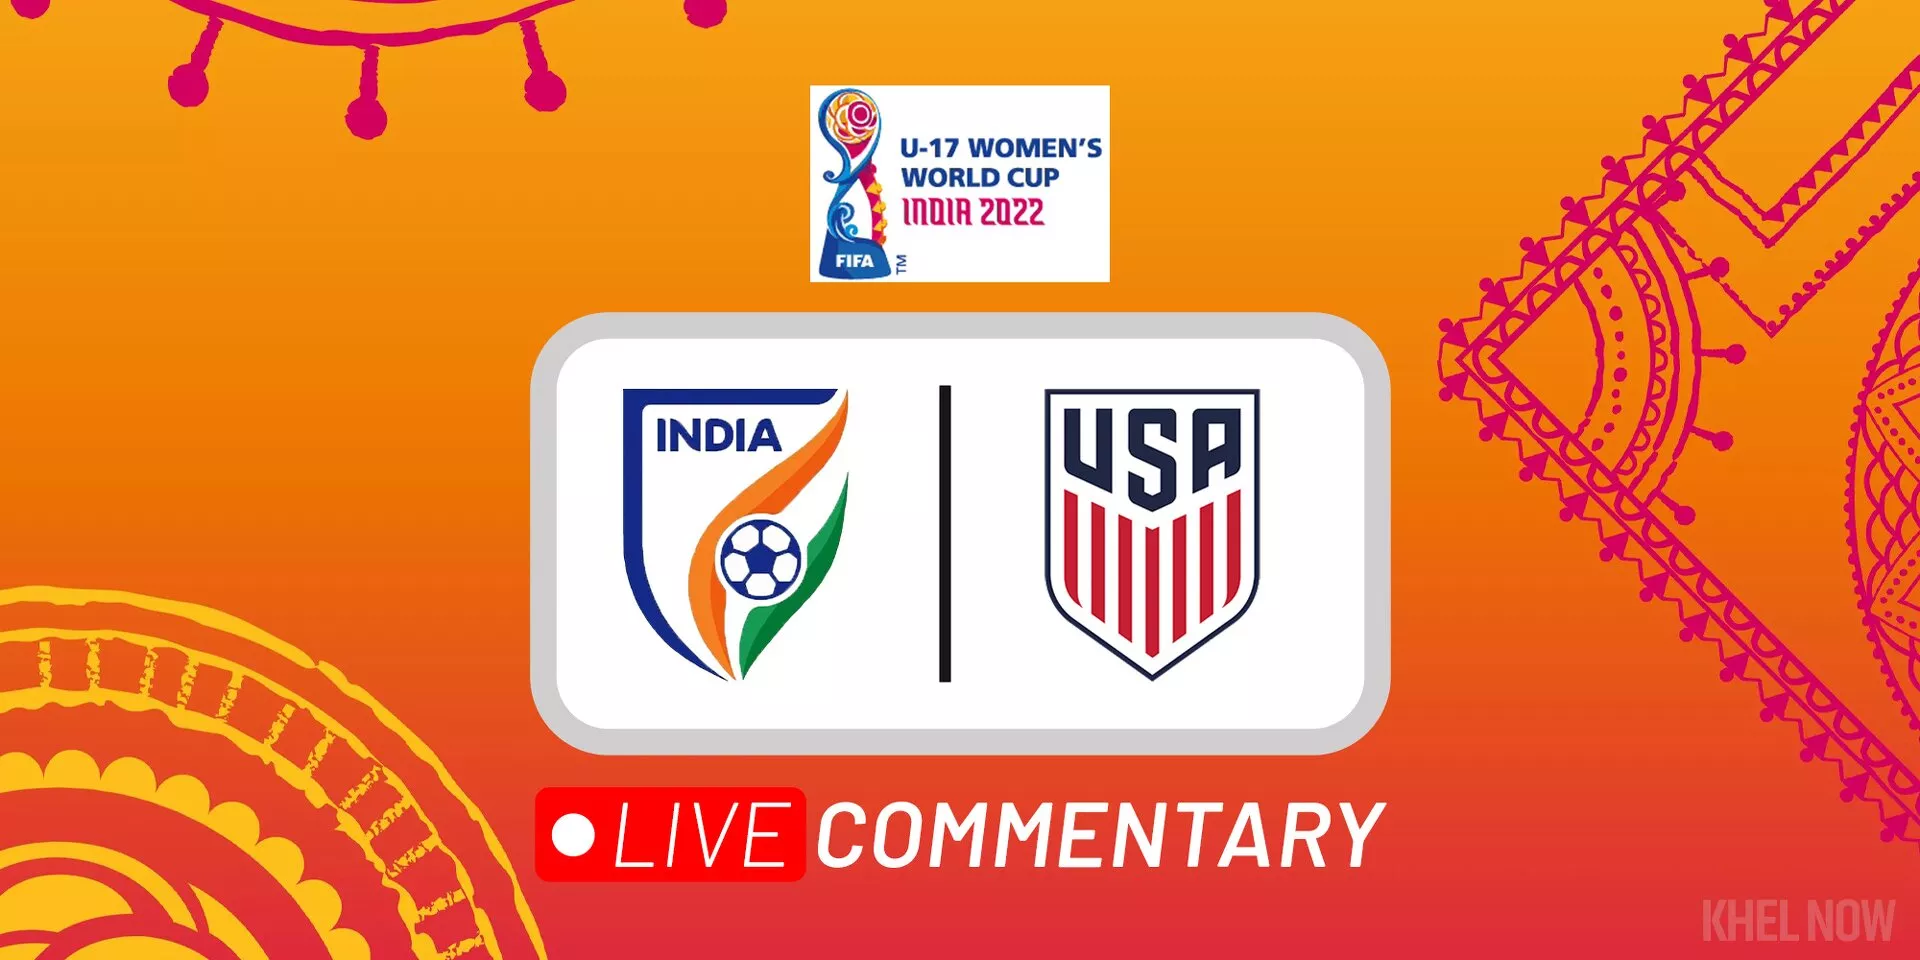 FIFA U-17 Womens World Cup 2022 India vs USA Live Commentary